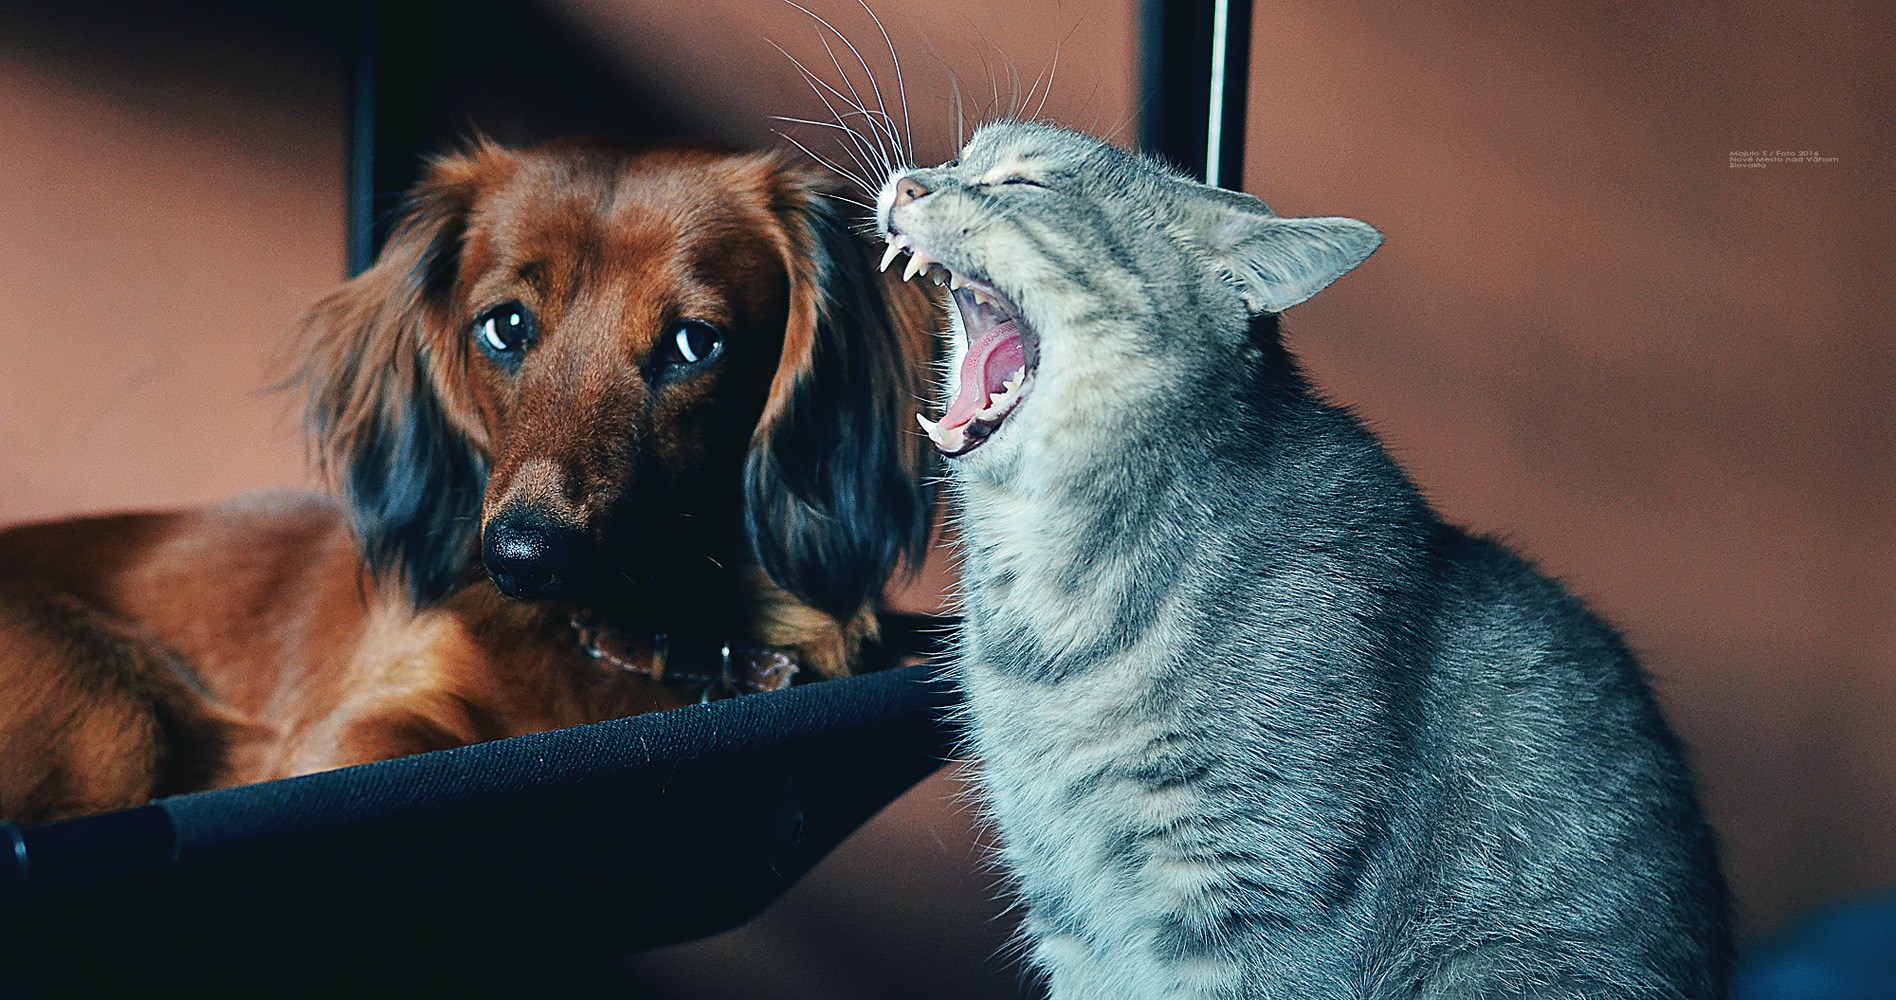 A Dachshund lying on its bed with a cat yawning next to him